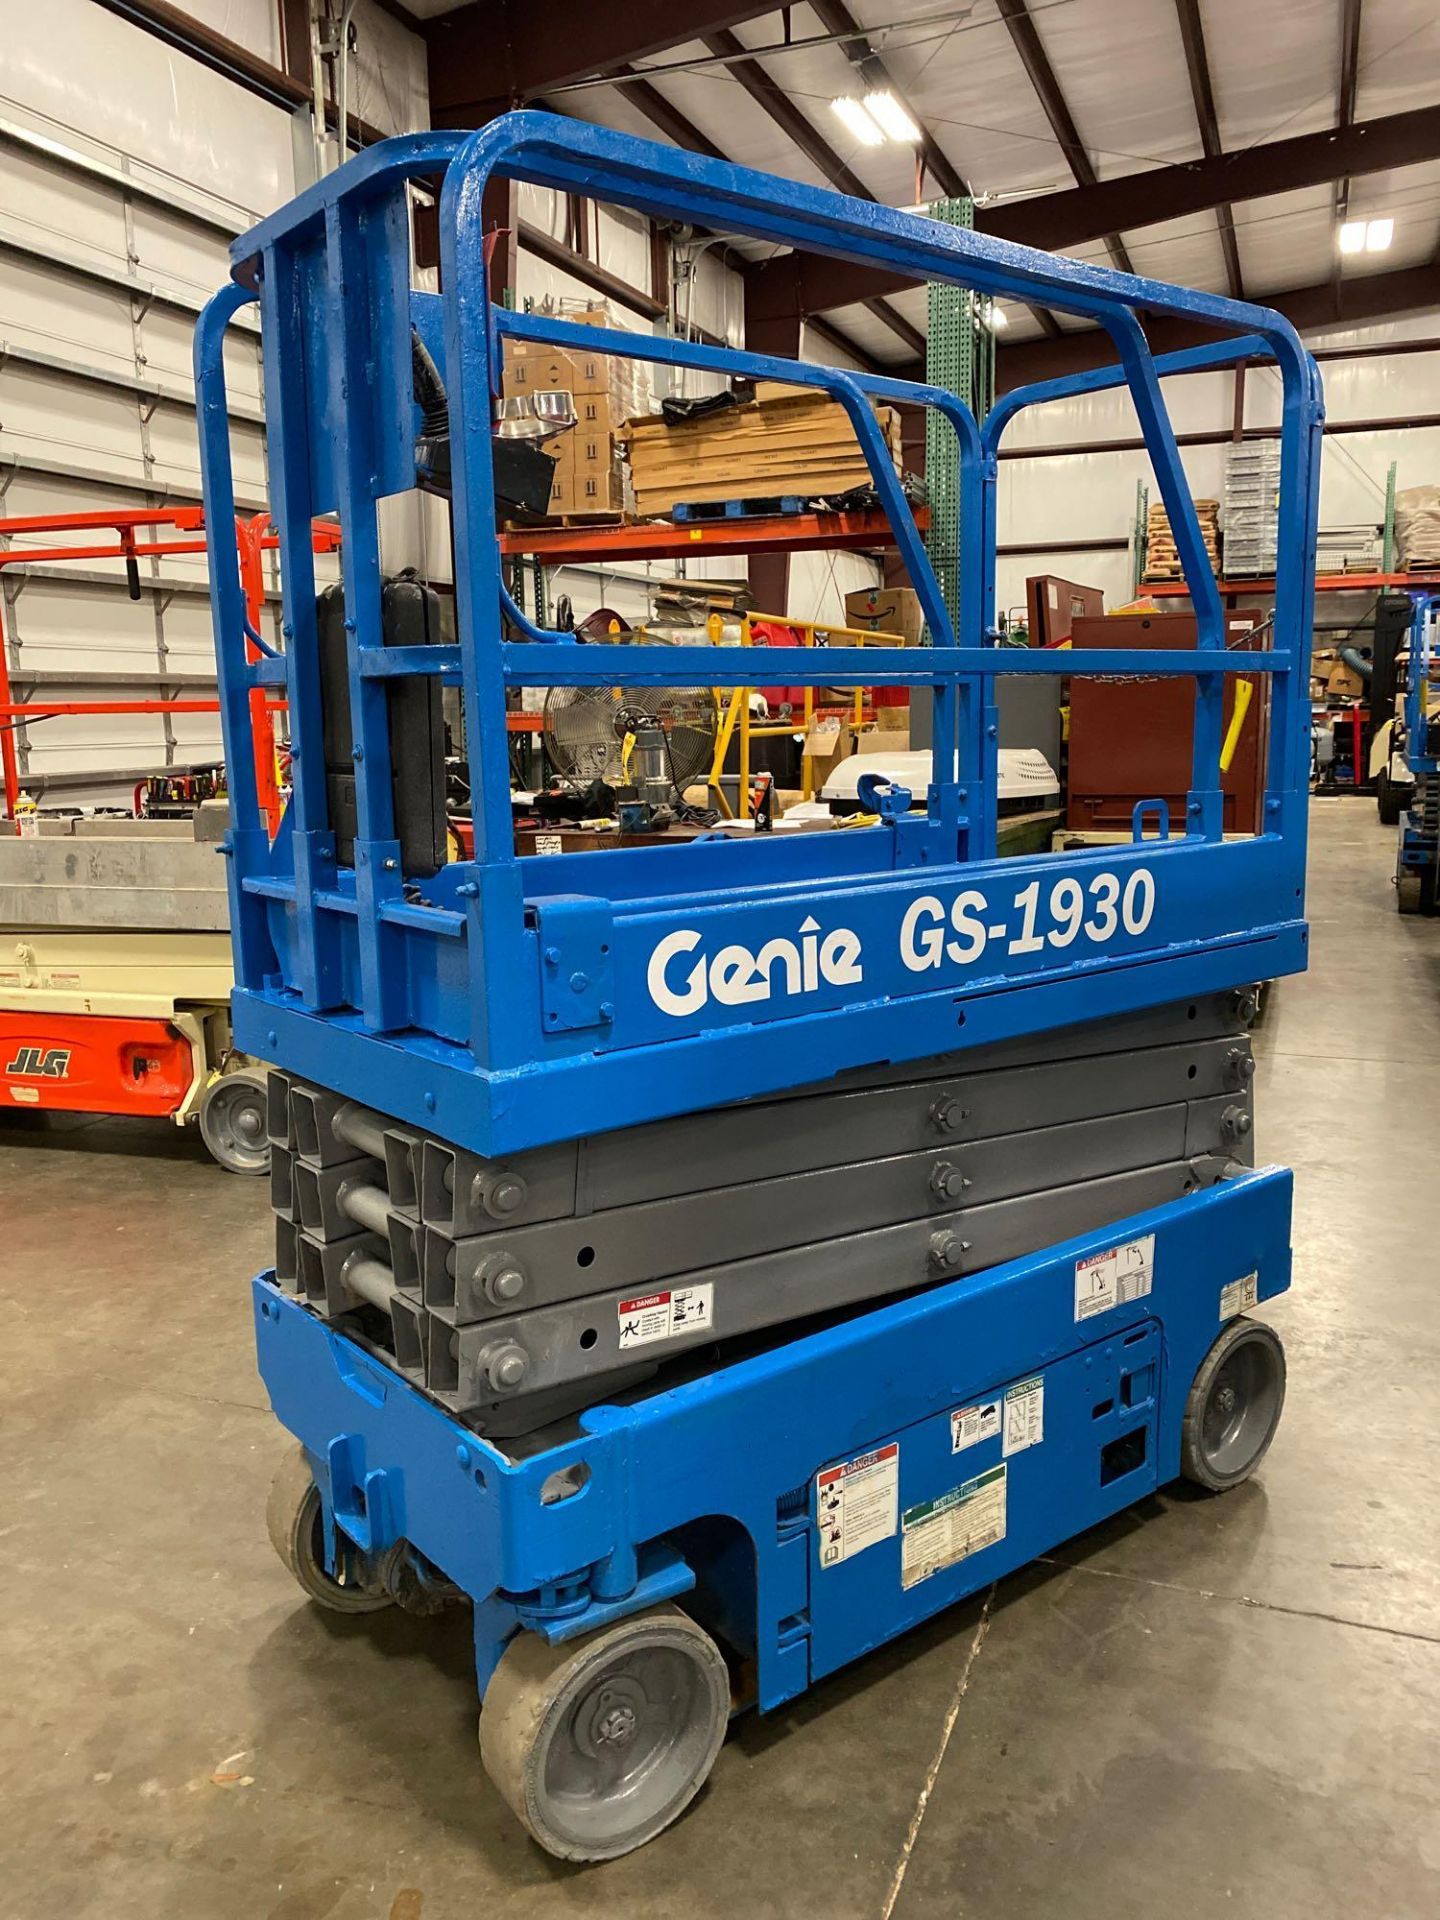 2013 GENIE GS1930 SCISSOR LIFT, SELF PROPELLED, 19' PLATFORM HEIGHT, BUILT IN BATTERY CHARGER, SLIDE - Image 3 of 7